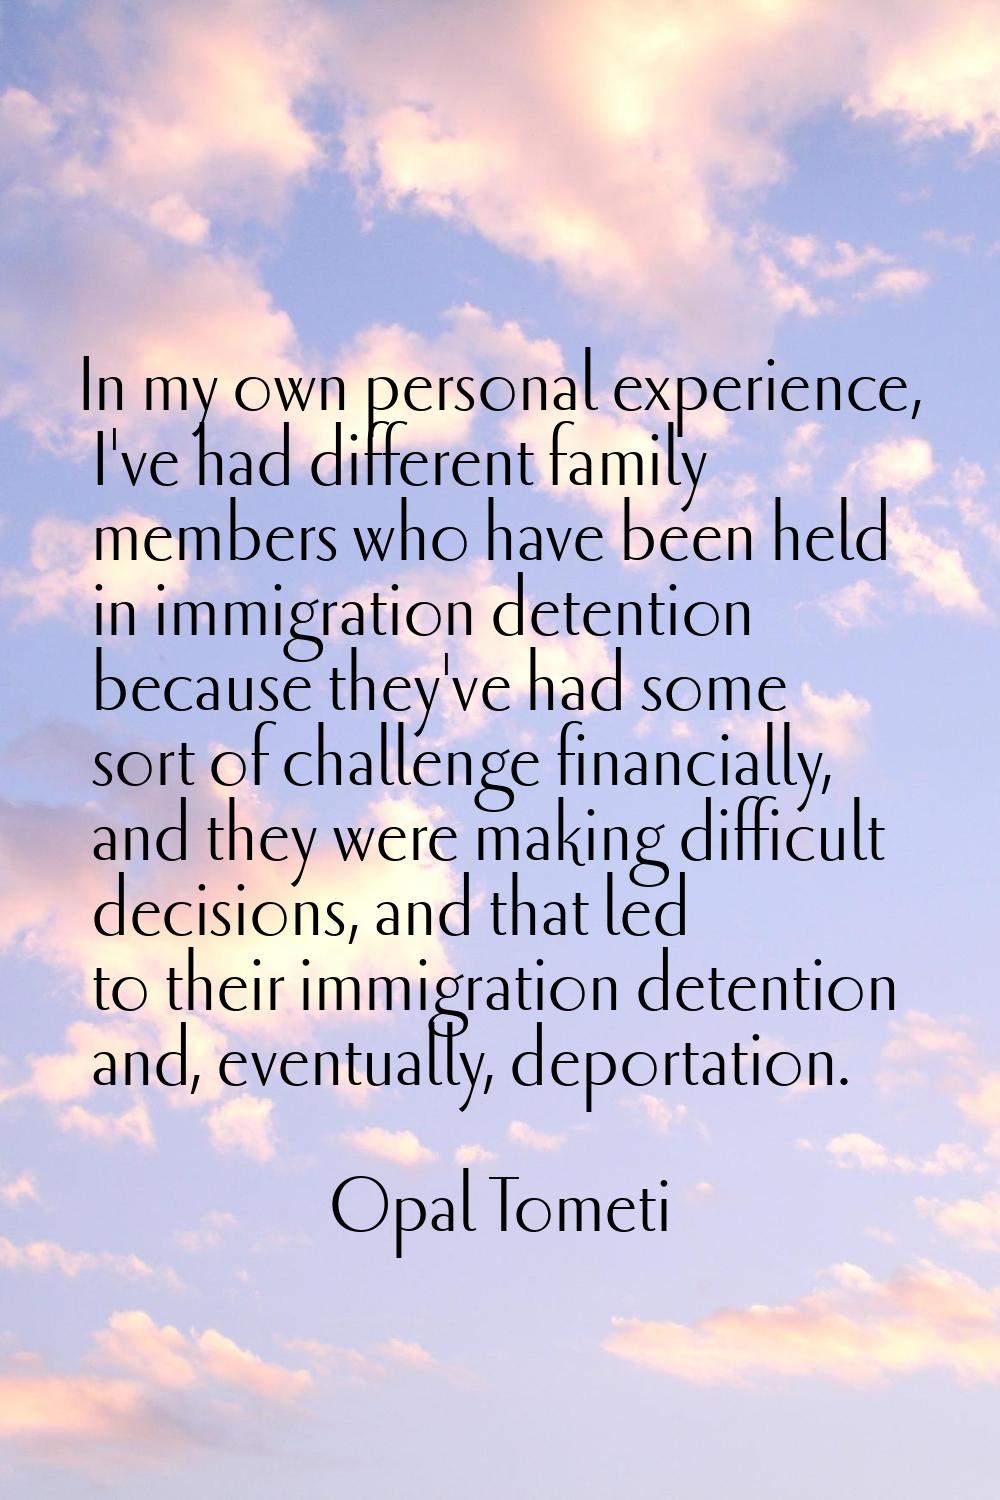 In my own personal experience, I've had different family members who have been held in immigration 